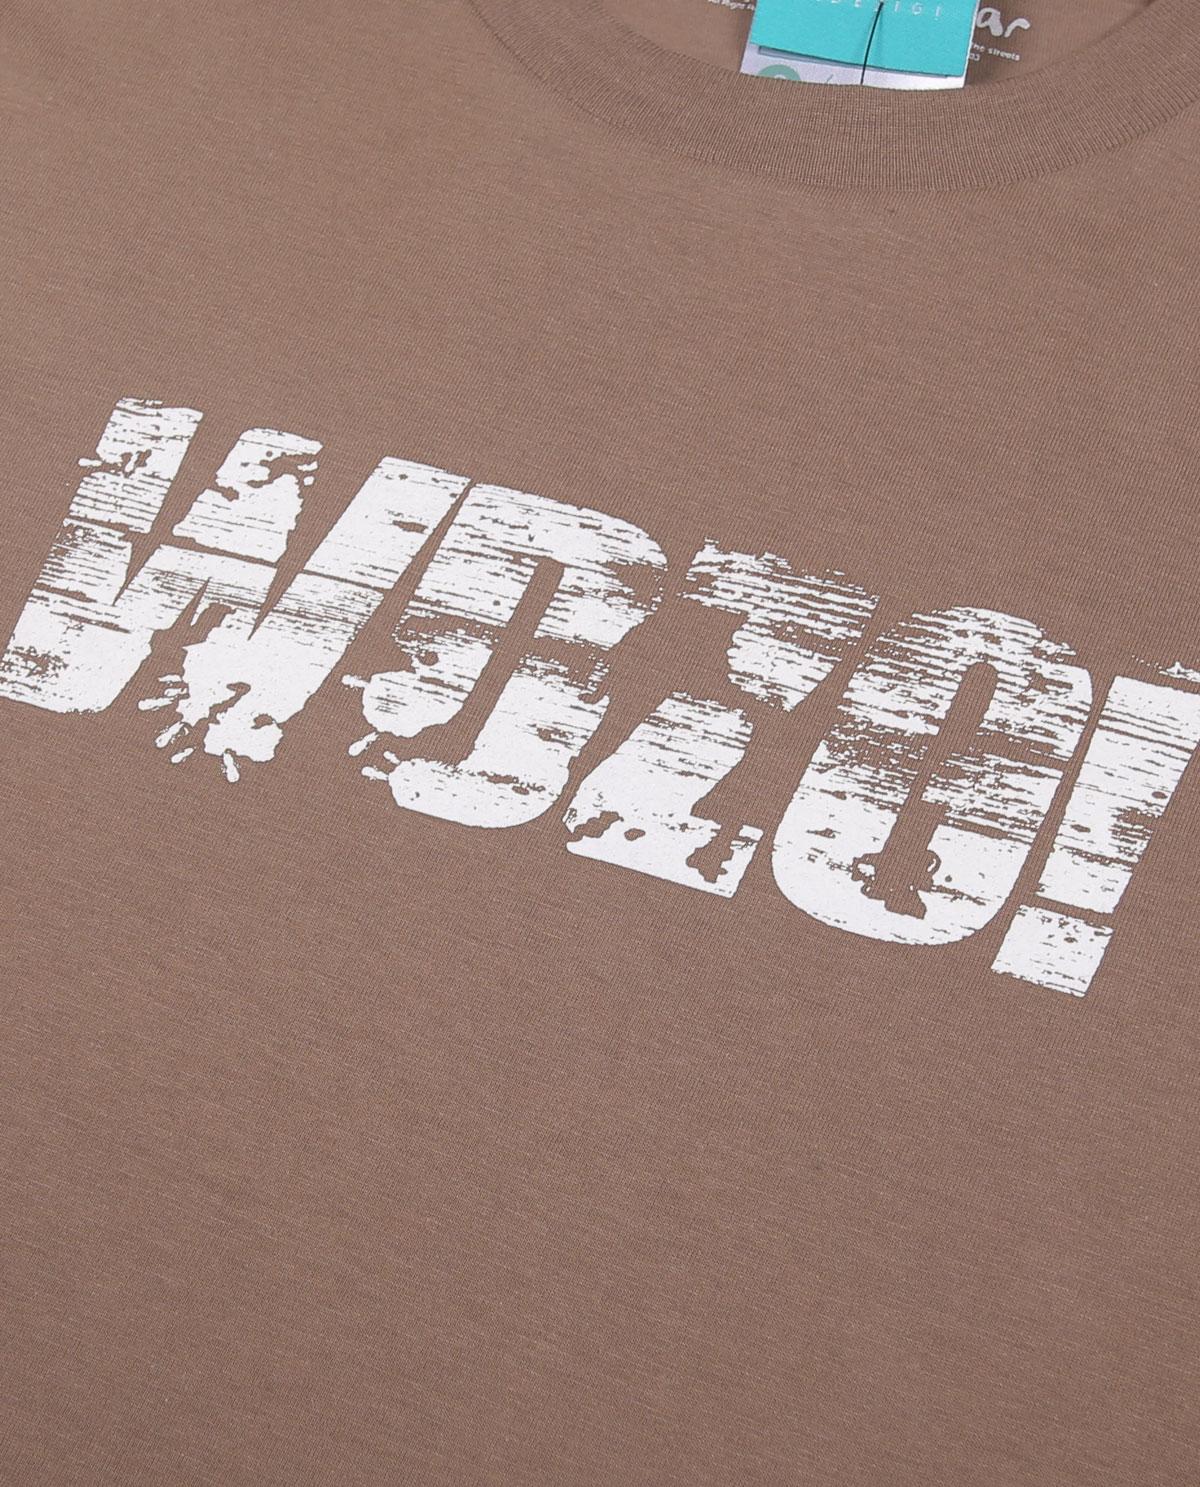 WADEZIG! T-SHIRT - INSECT SIMPLY MAPLE BROWN